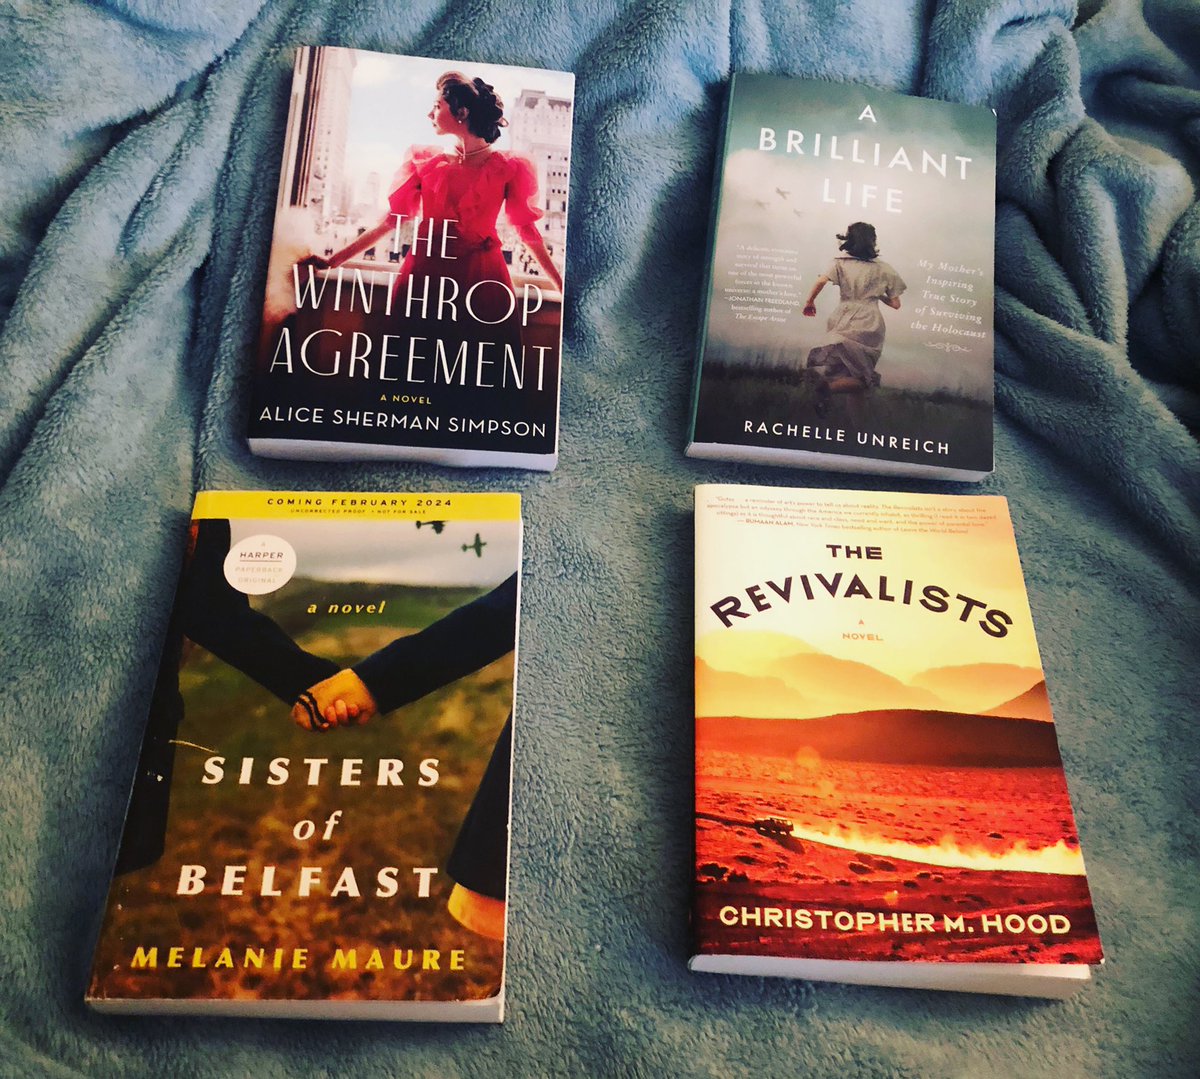 Goodbye 2023, Hello 2024! These were my top 4 favorite books that @HarperPerennial gifted me. All the authors are amazing writers and I loved these books so much. #BooksOfTheYear #HappyNewYear2024 #HappyNewYear #Reading #harperperennial #oliveinfluncer #BookRecommendations